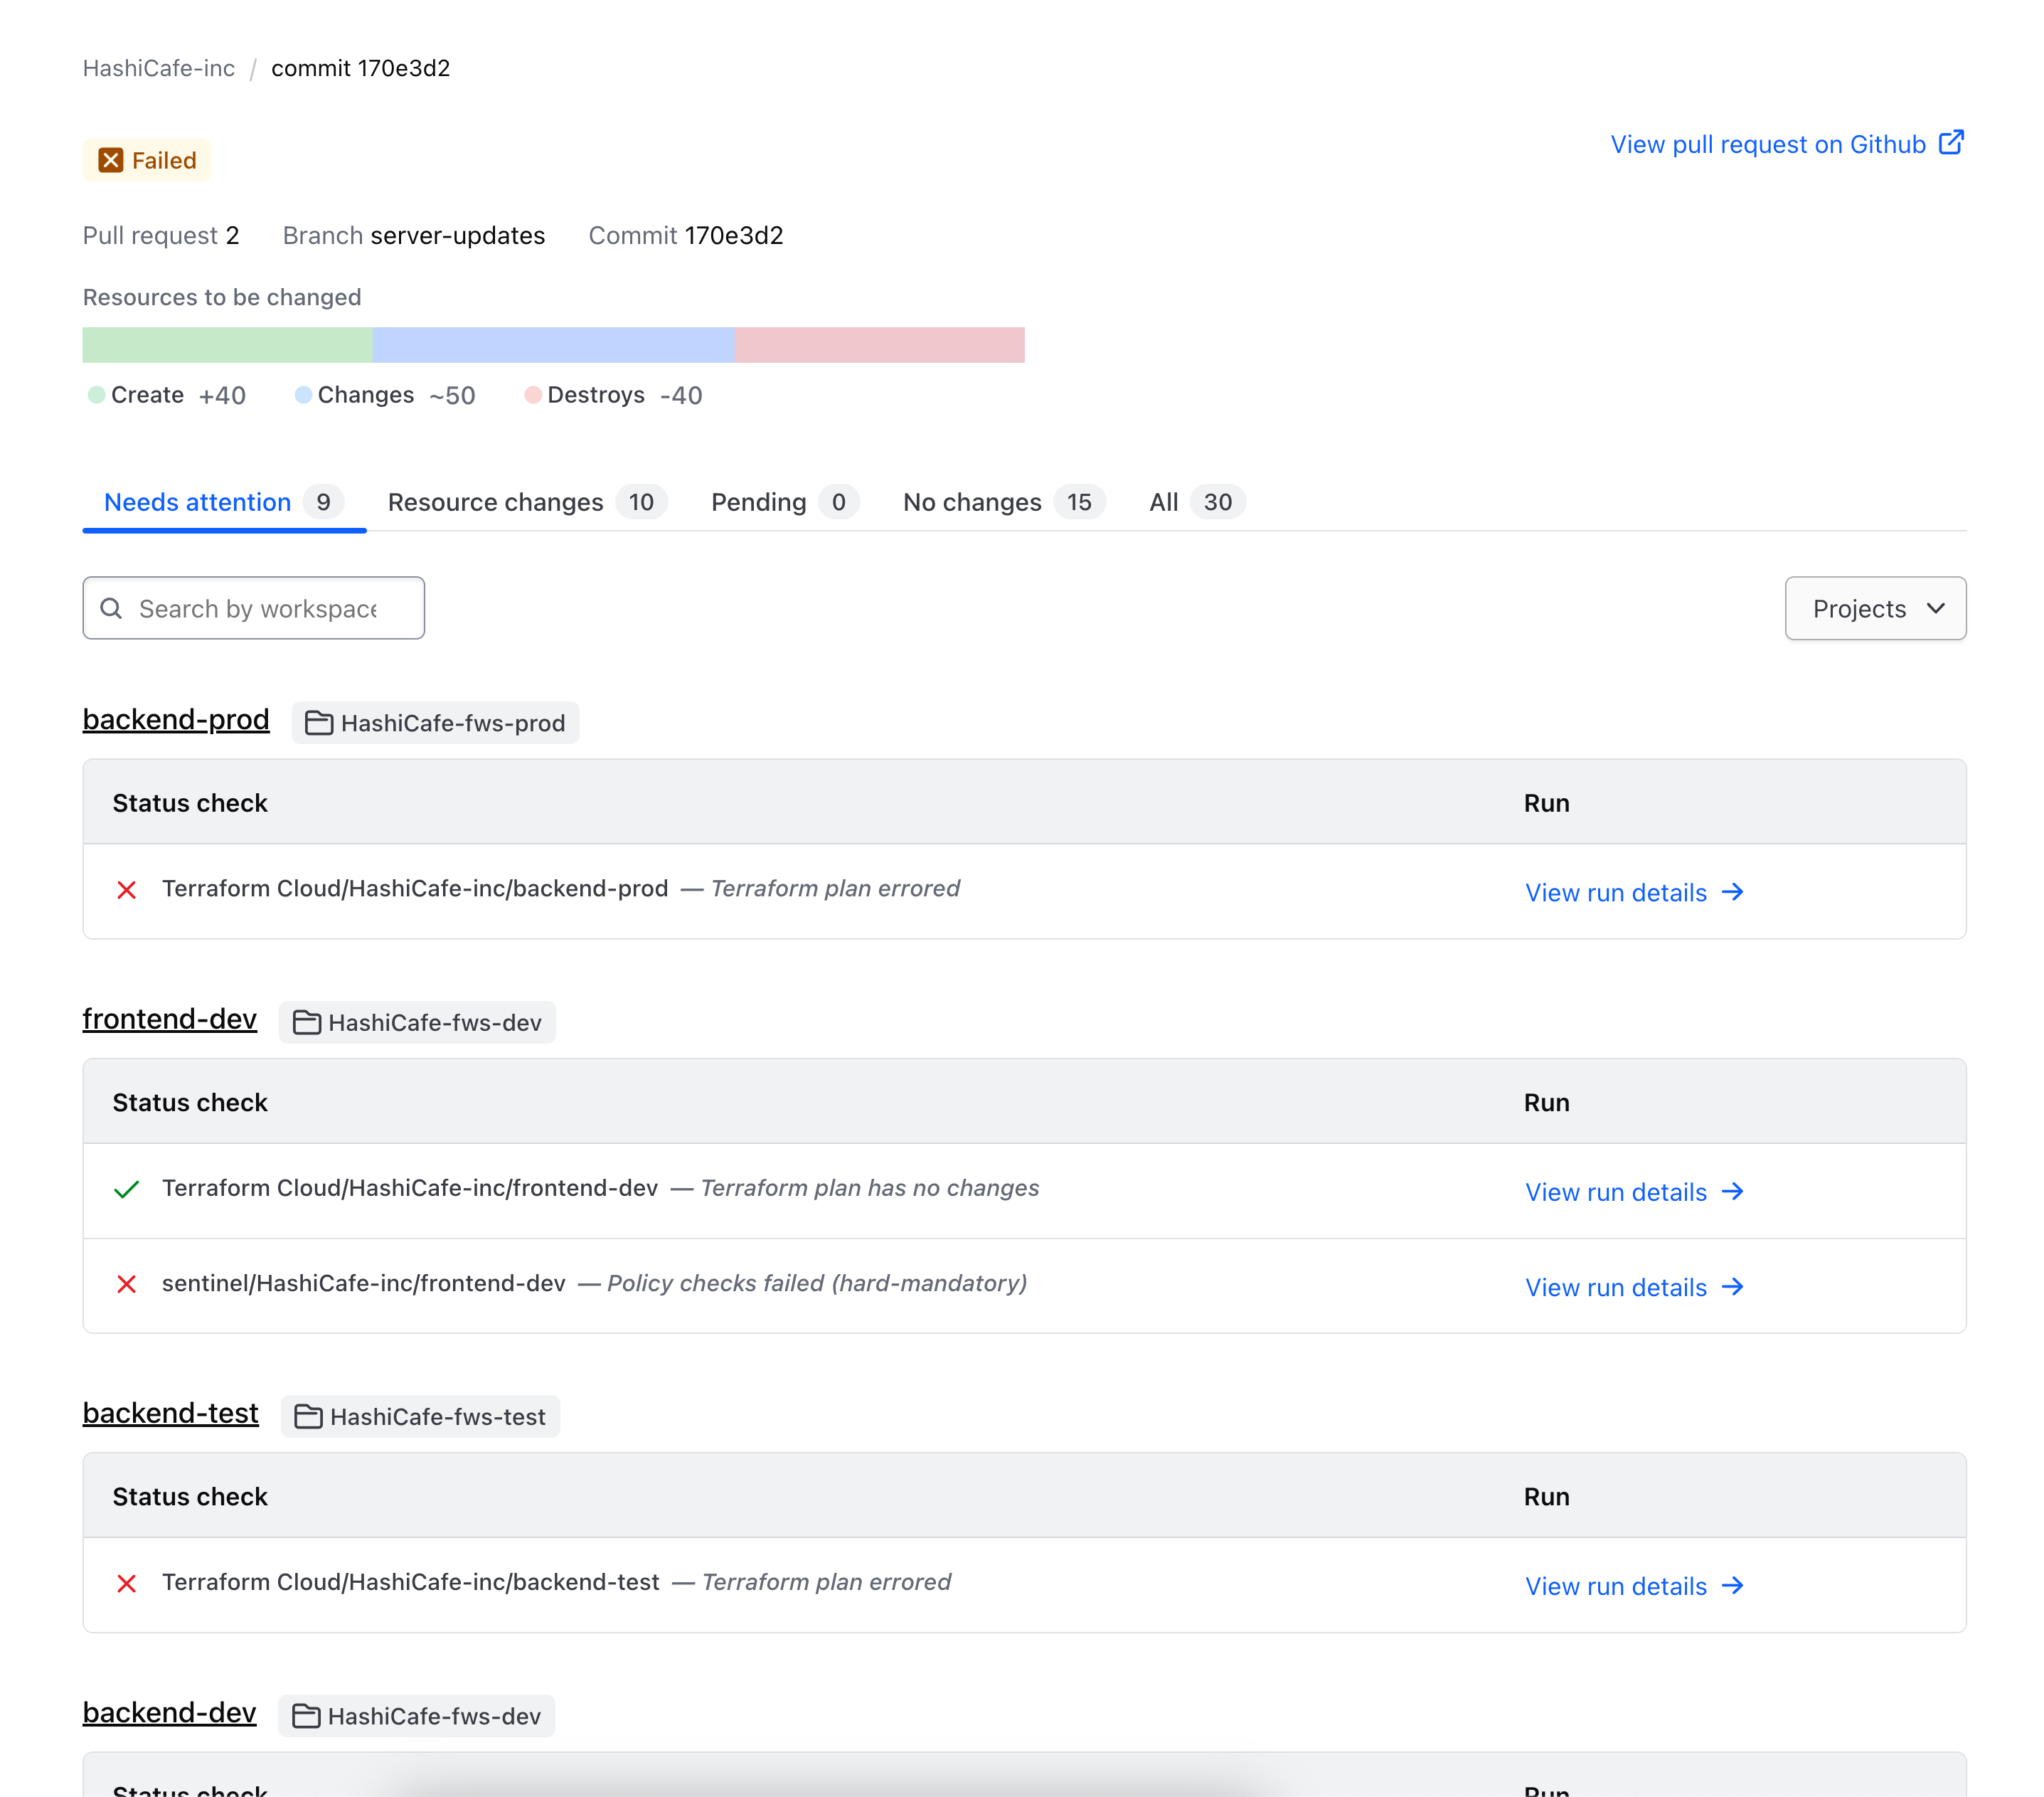 The new commit page summarizes all resource changes for workspaces connected to the repository.